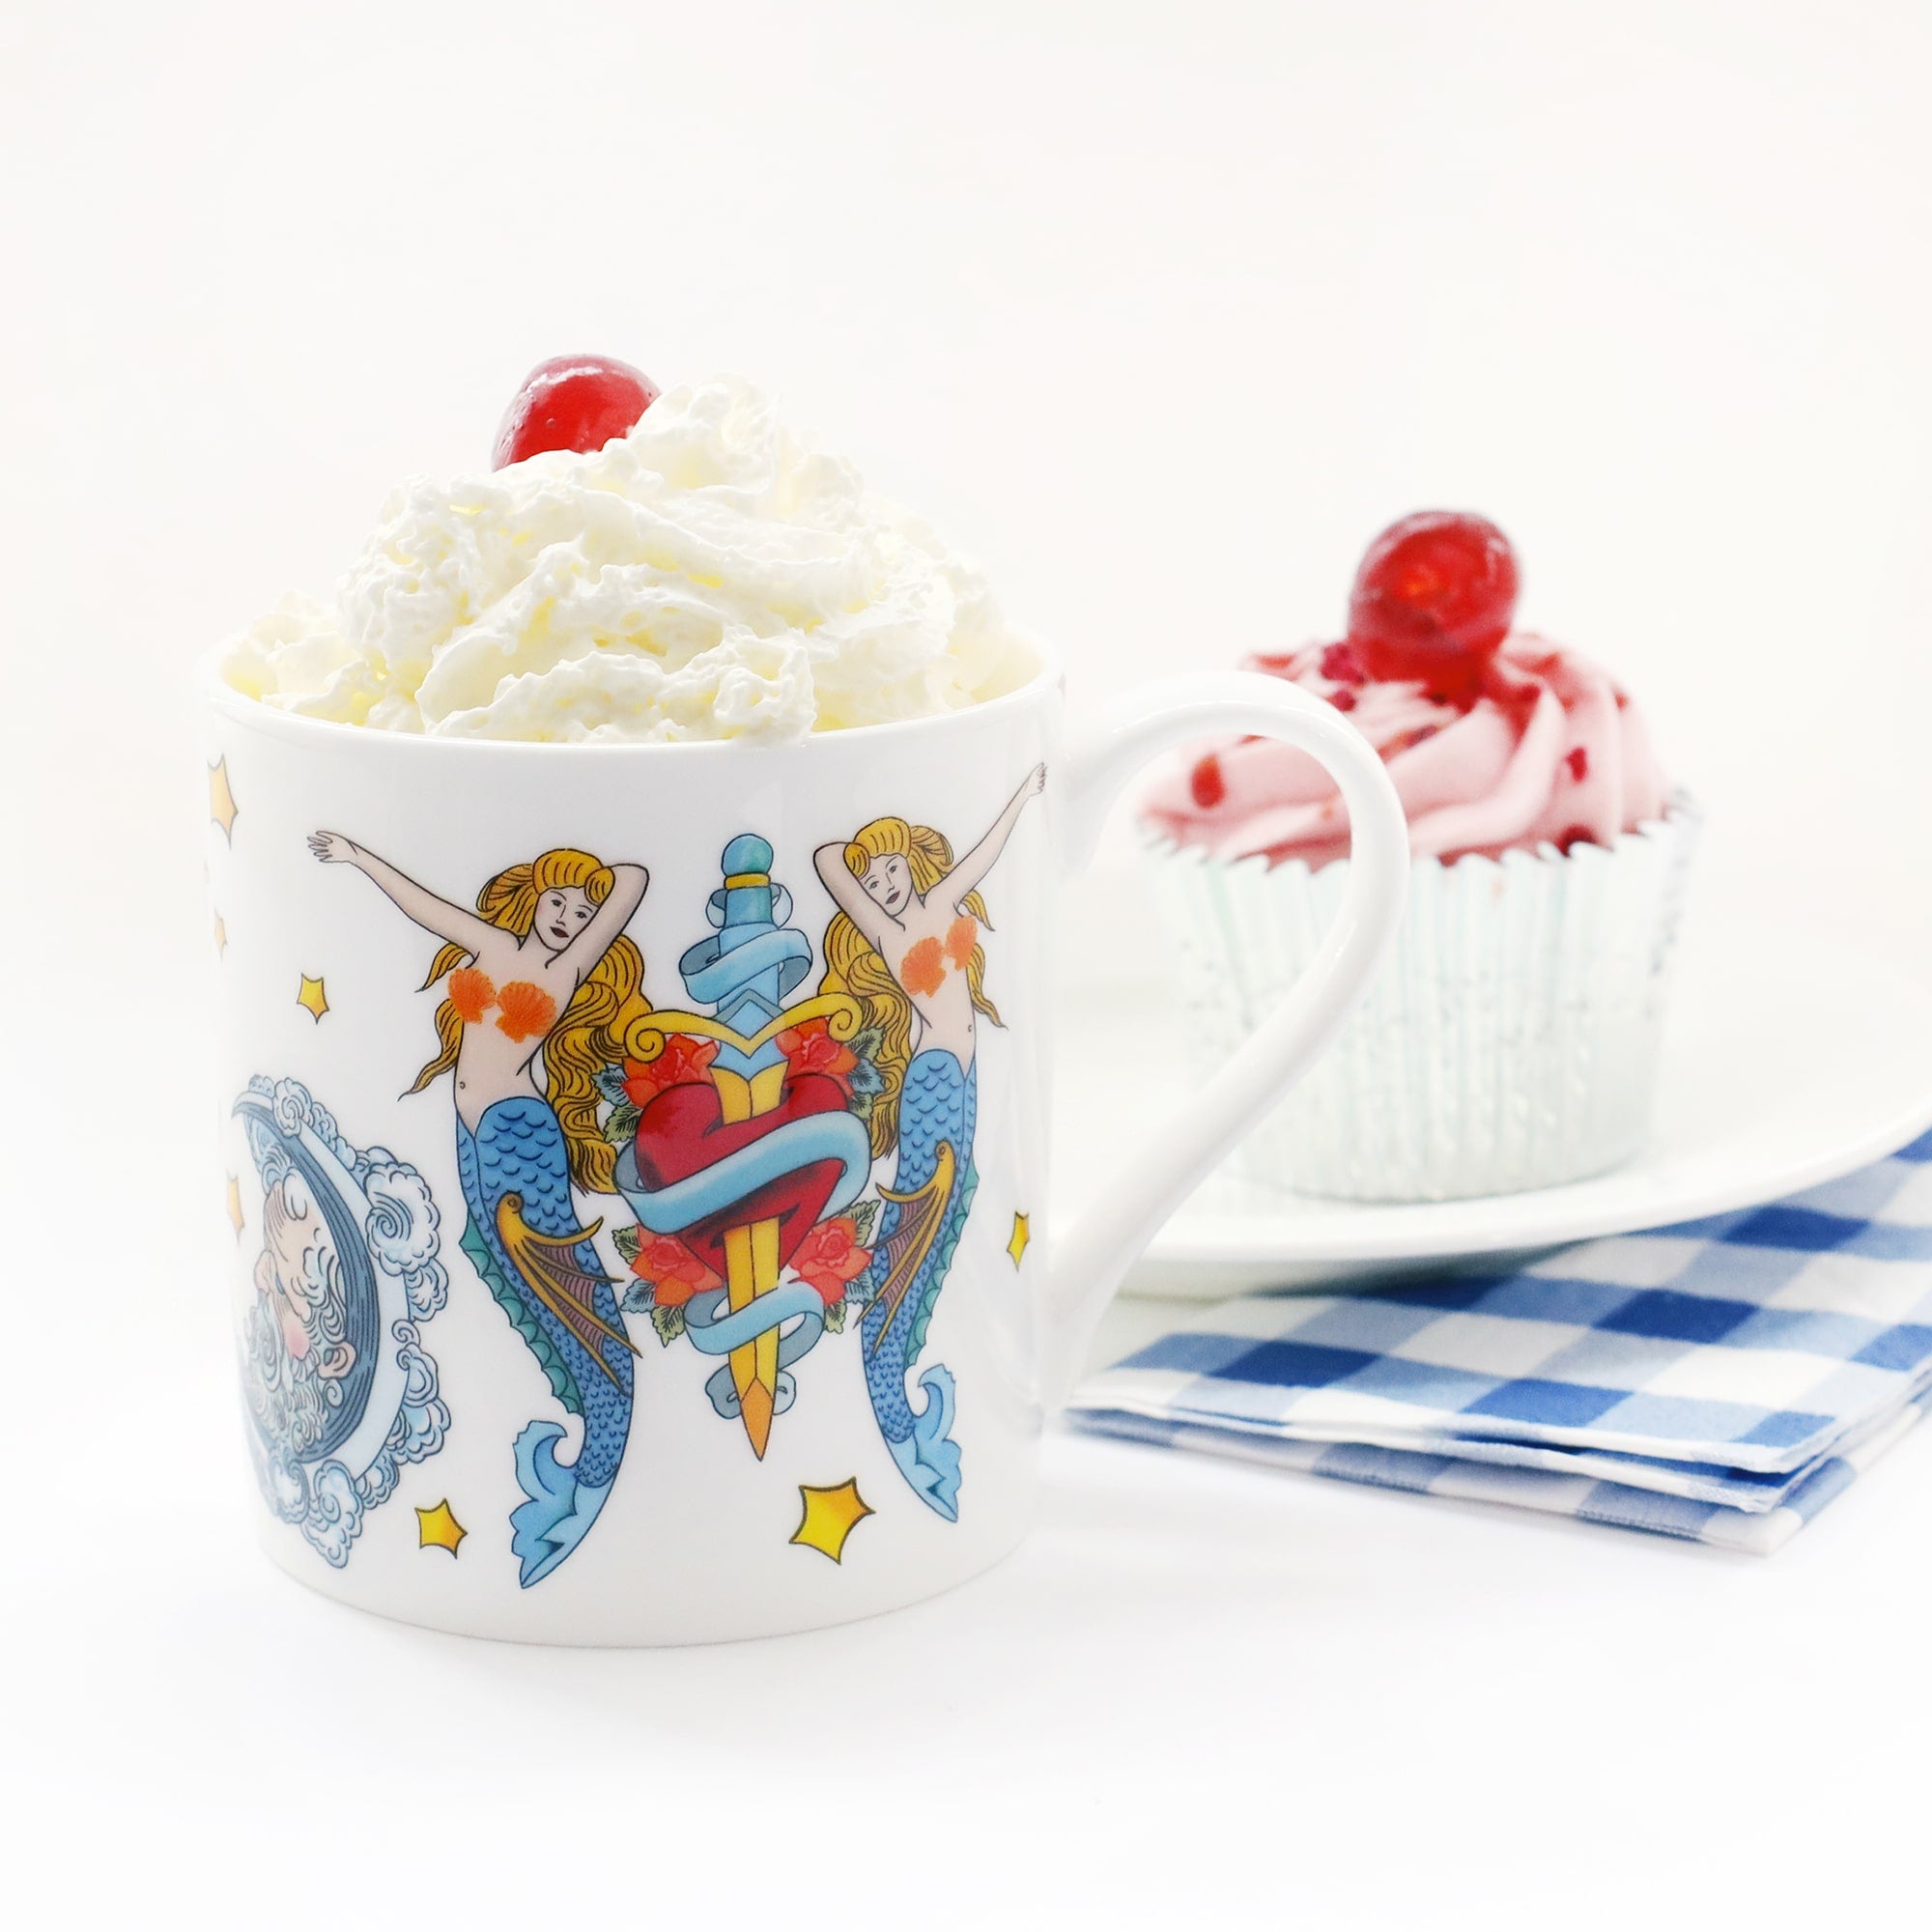 White mug decorated in a brightly coloured tattoo inspired design of mermaids and daggers. the mug is filled with whipped cream with a cherry on top. There is a pink cupcake with a cherry on top in the background and a blue checkered napkin.